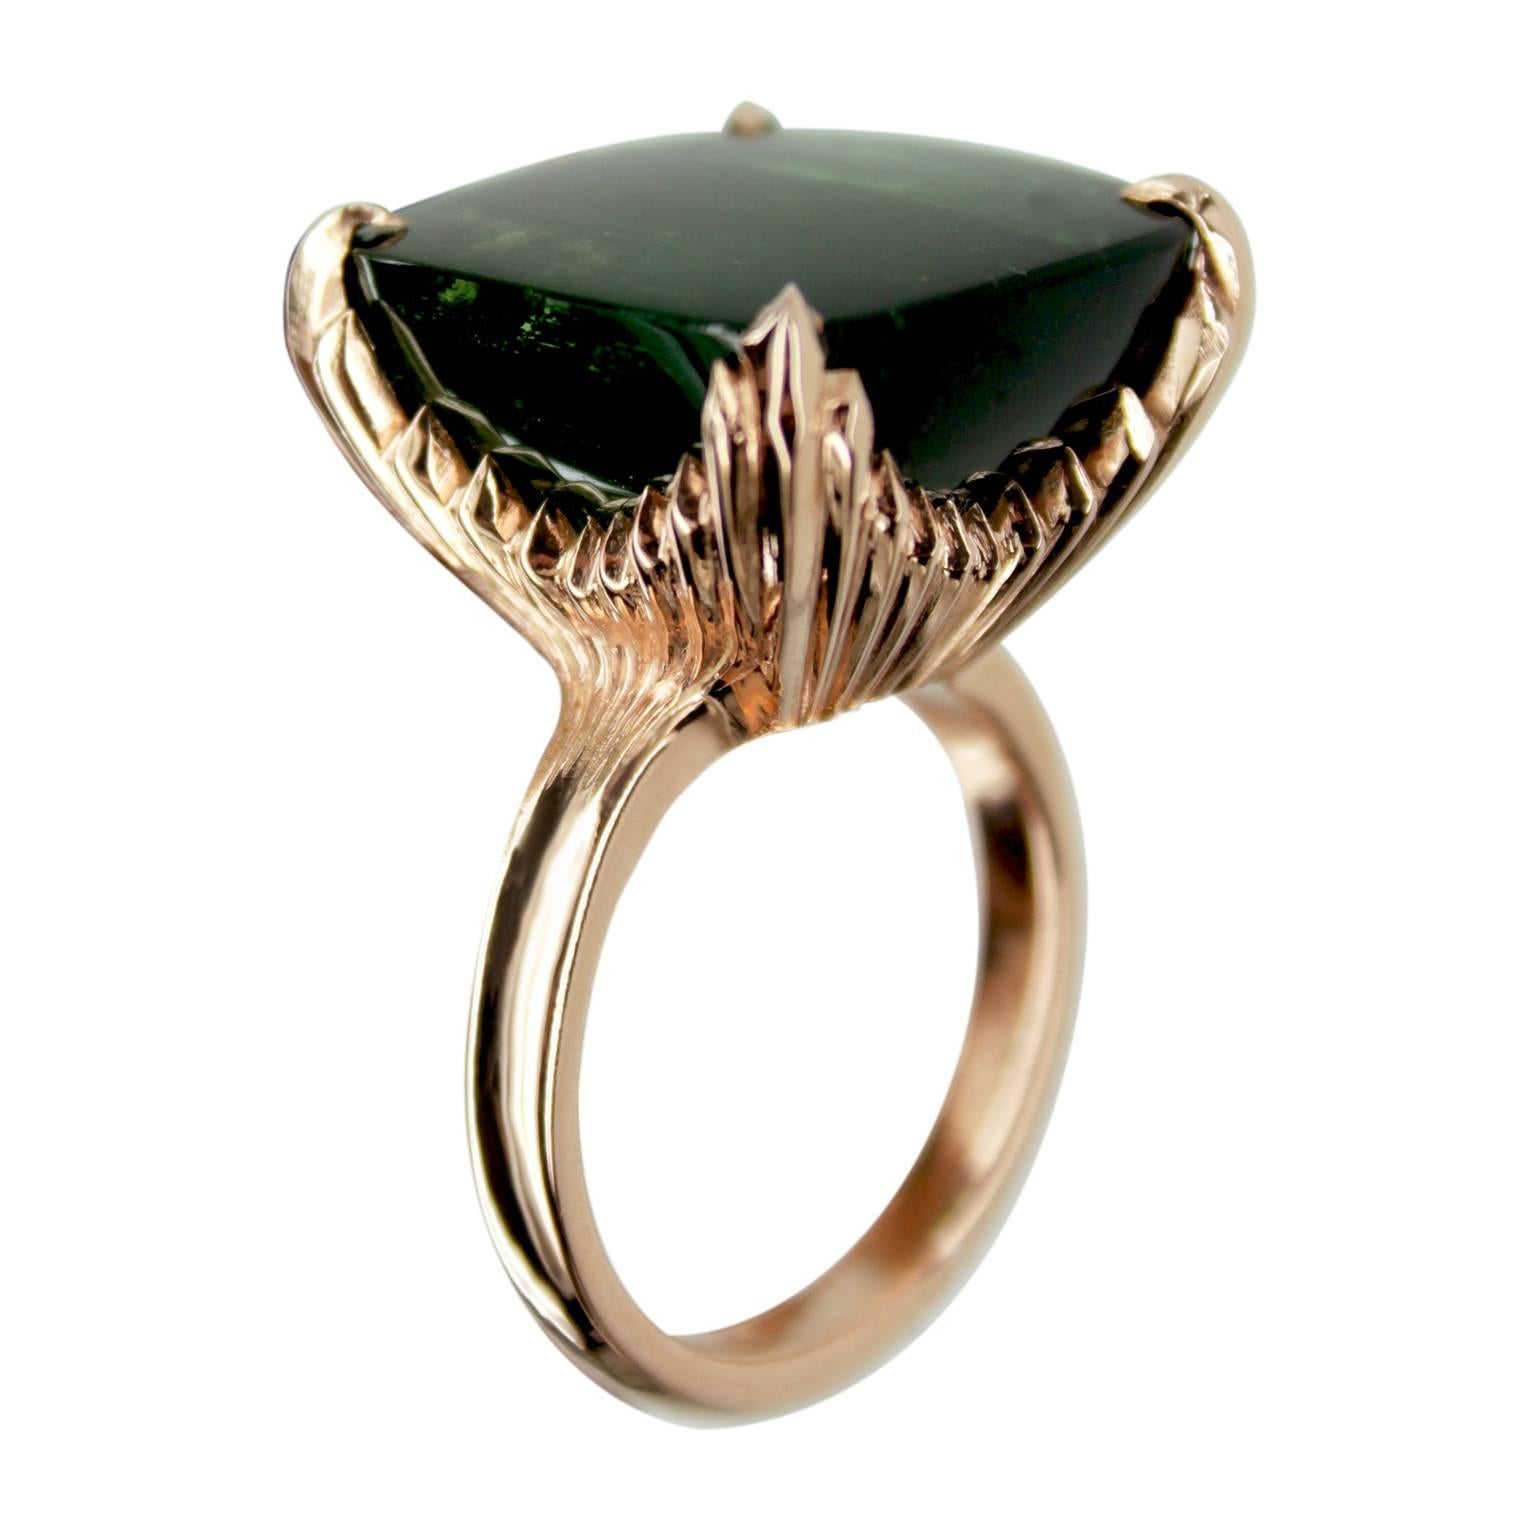 A stunning one-off 23 ct buff top cushion cut deep green tourmaline stone, set into a four claw 9ct rose gold ring.

The detail carries on underneath to create a raised mount of grooves and filed angles. This really catches the light as you move the